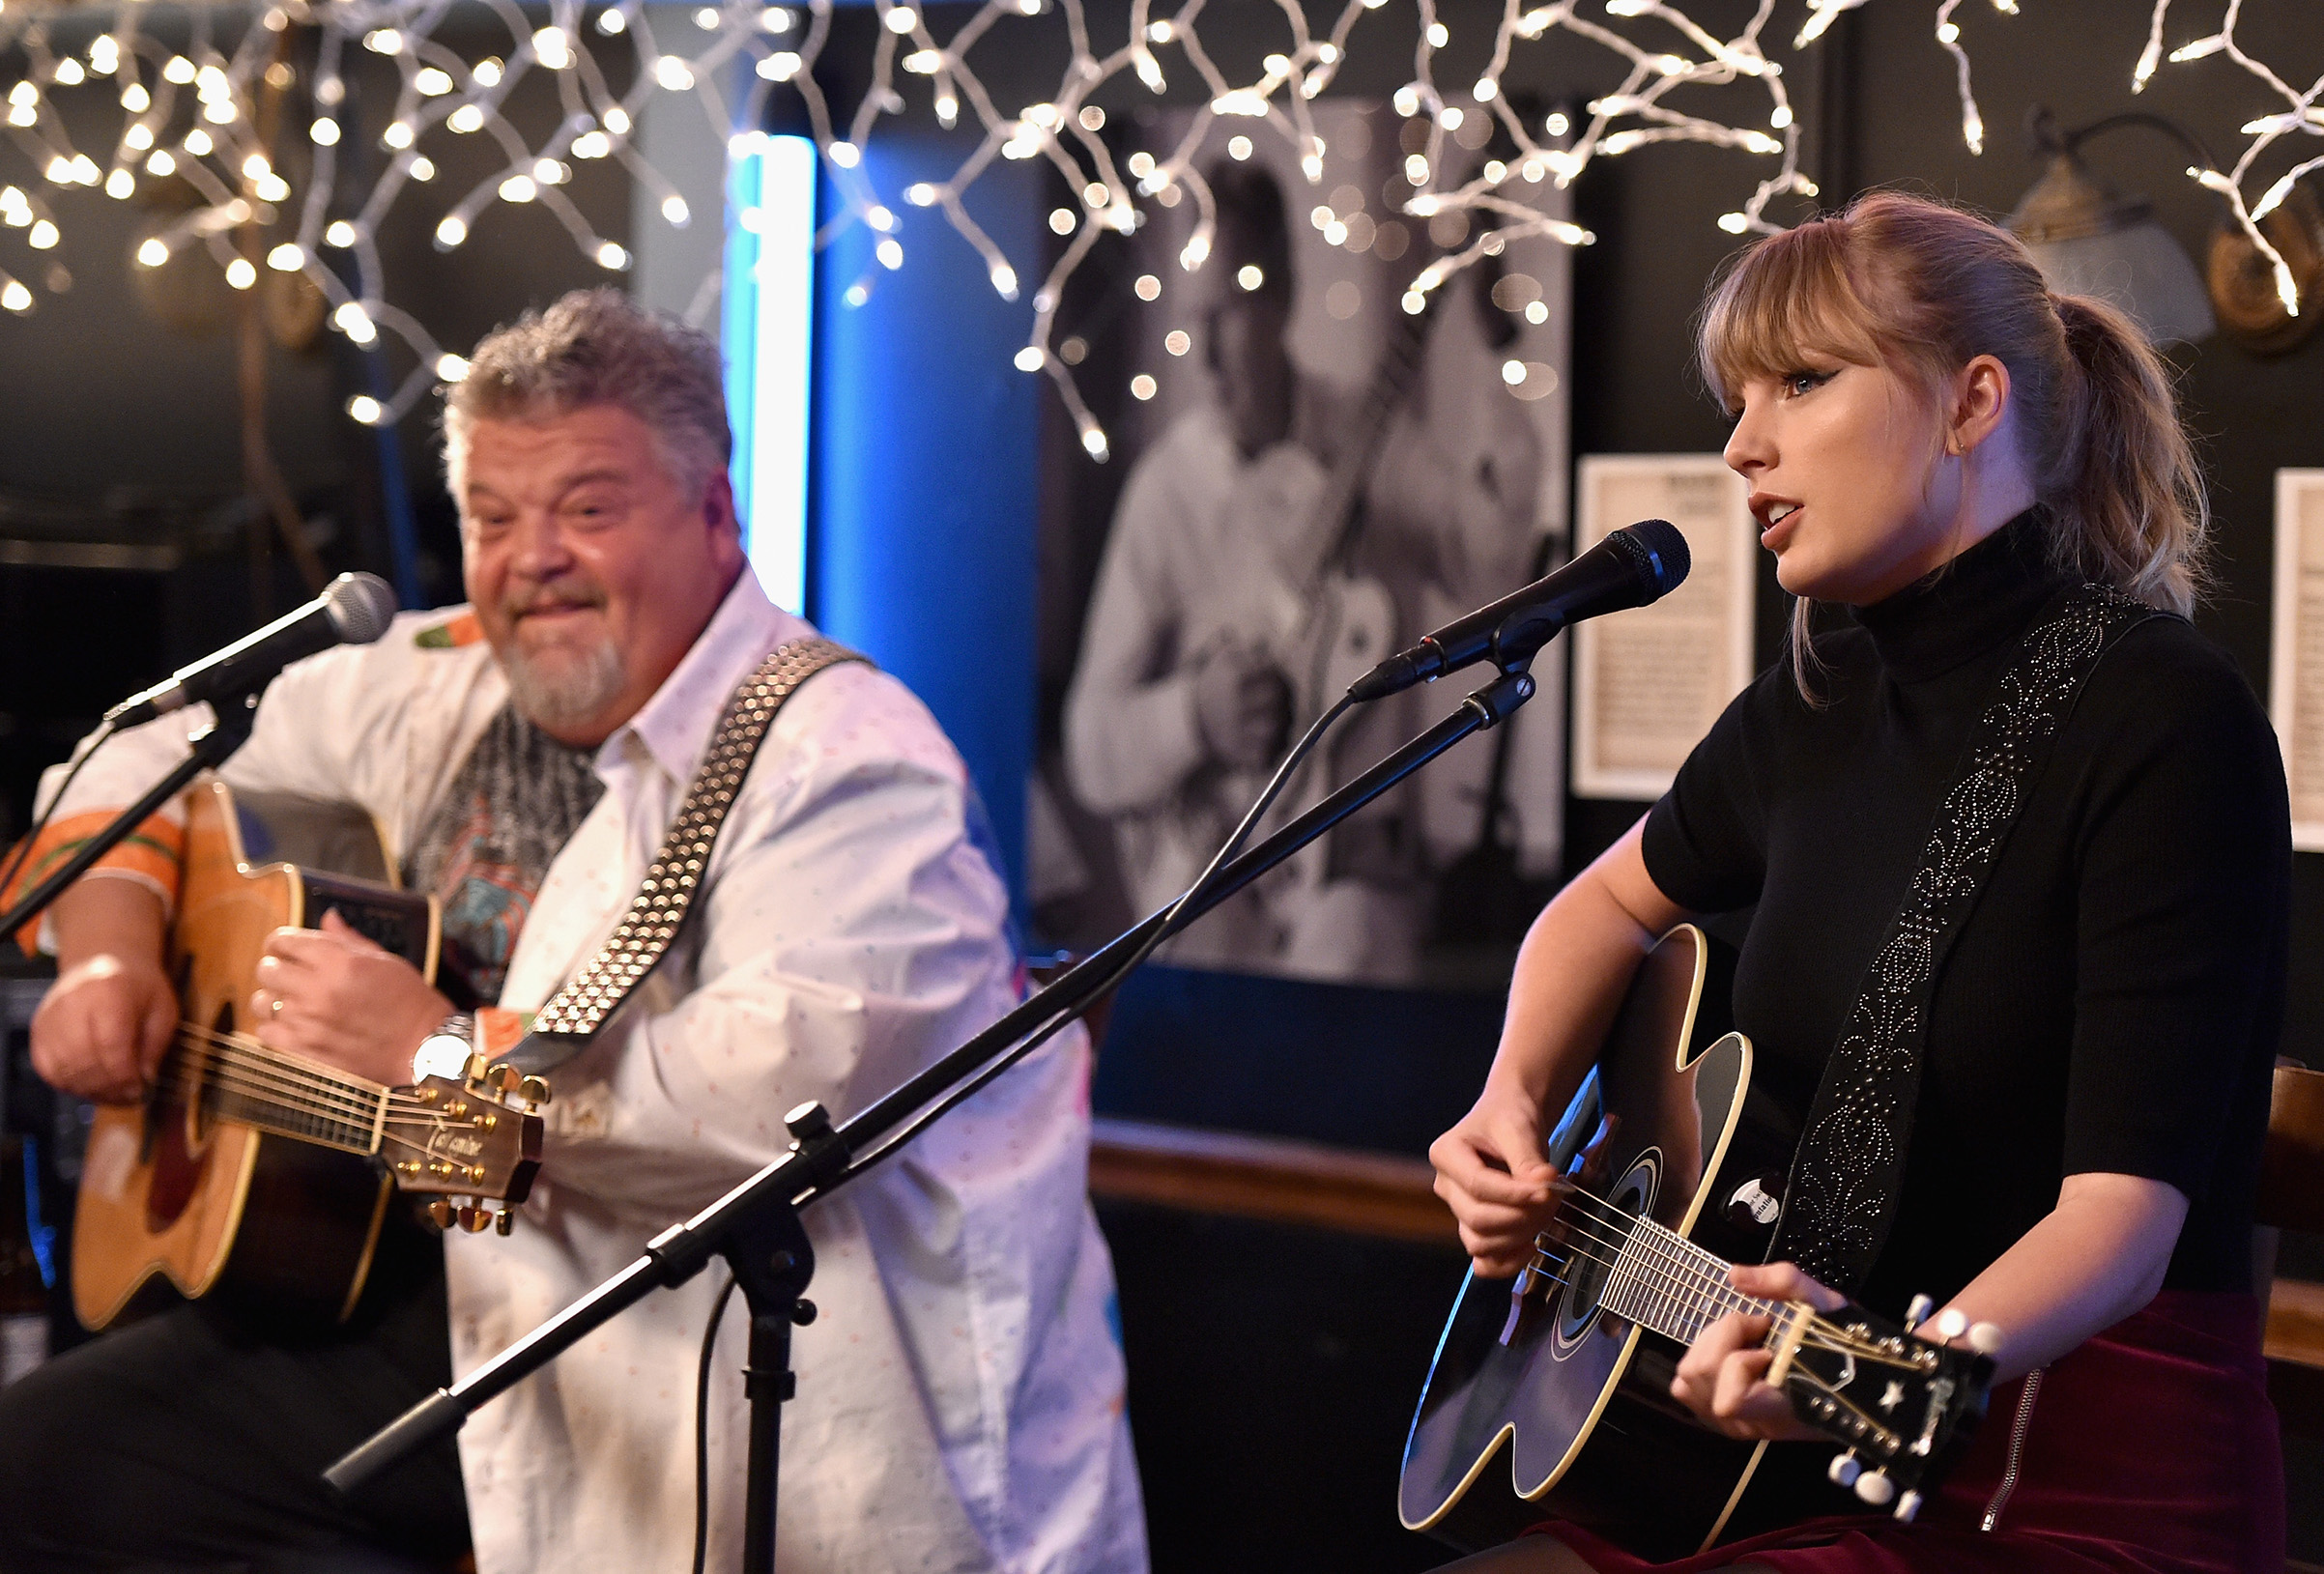 Craig Wiseman and special guest Taylor Swift perform onstage at Bluebird Cafe on March 31, 2018 in Nashville. (John Shearer—13 Management/Getty Images)